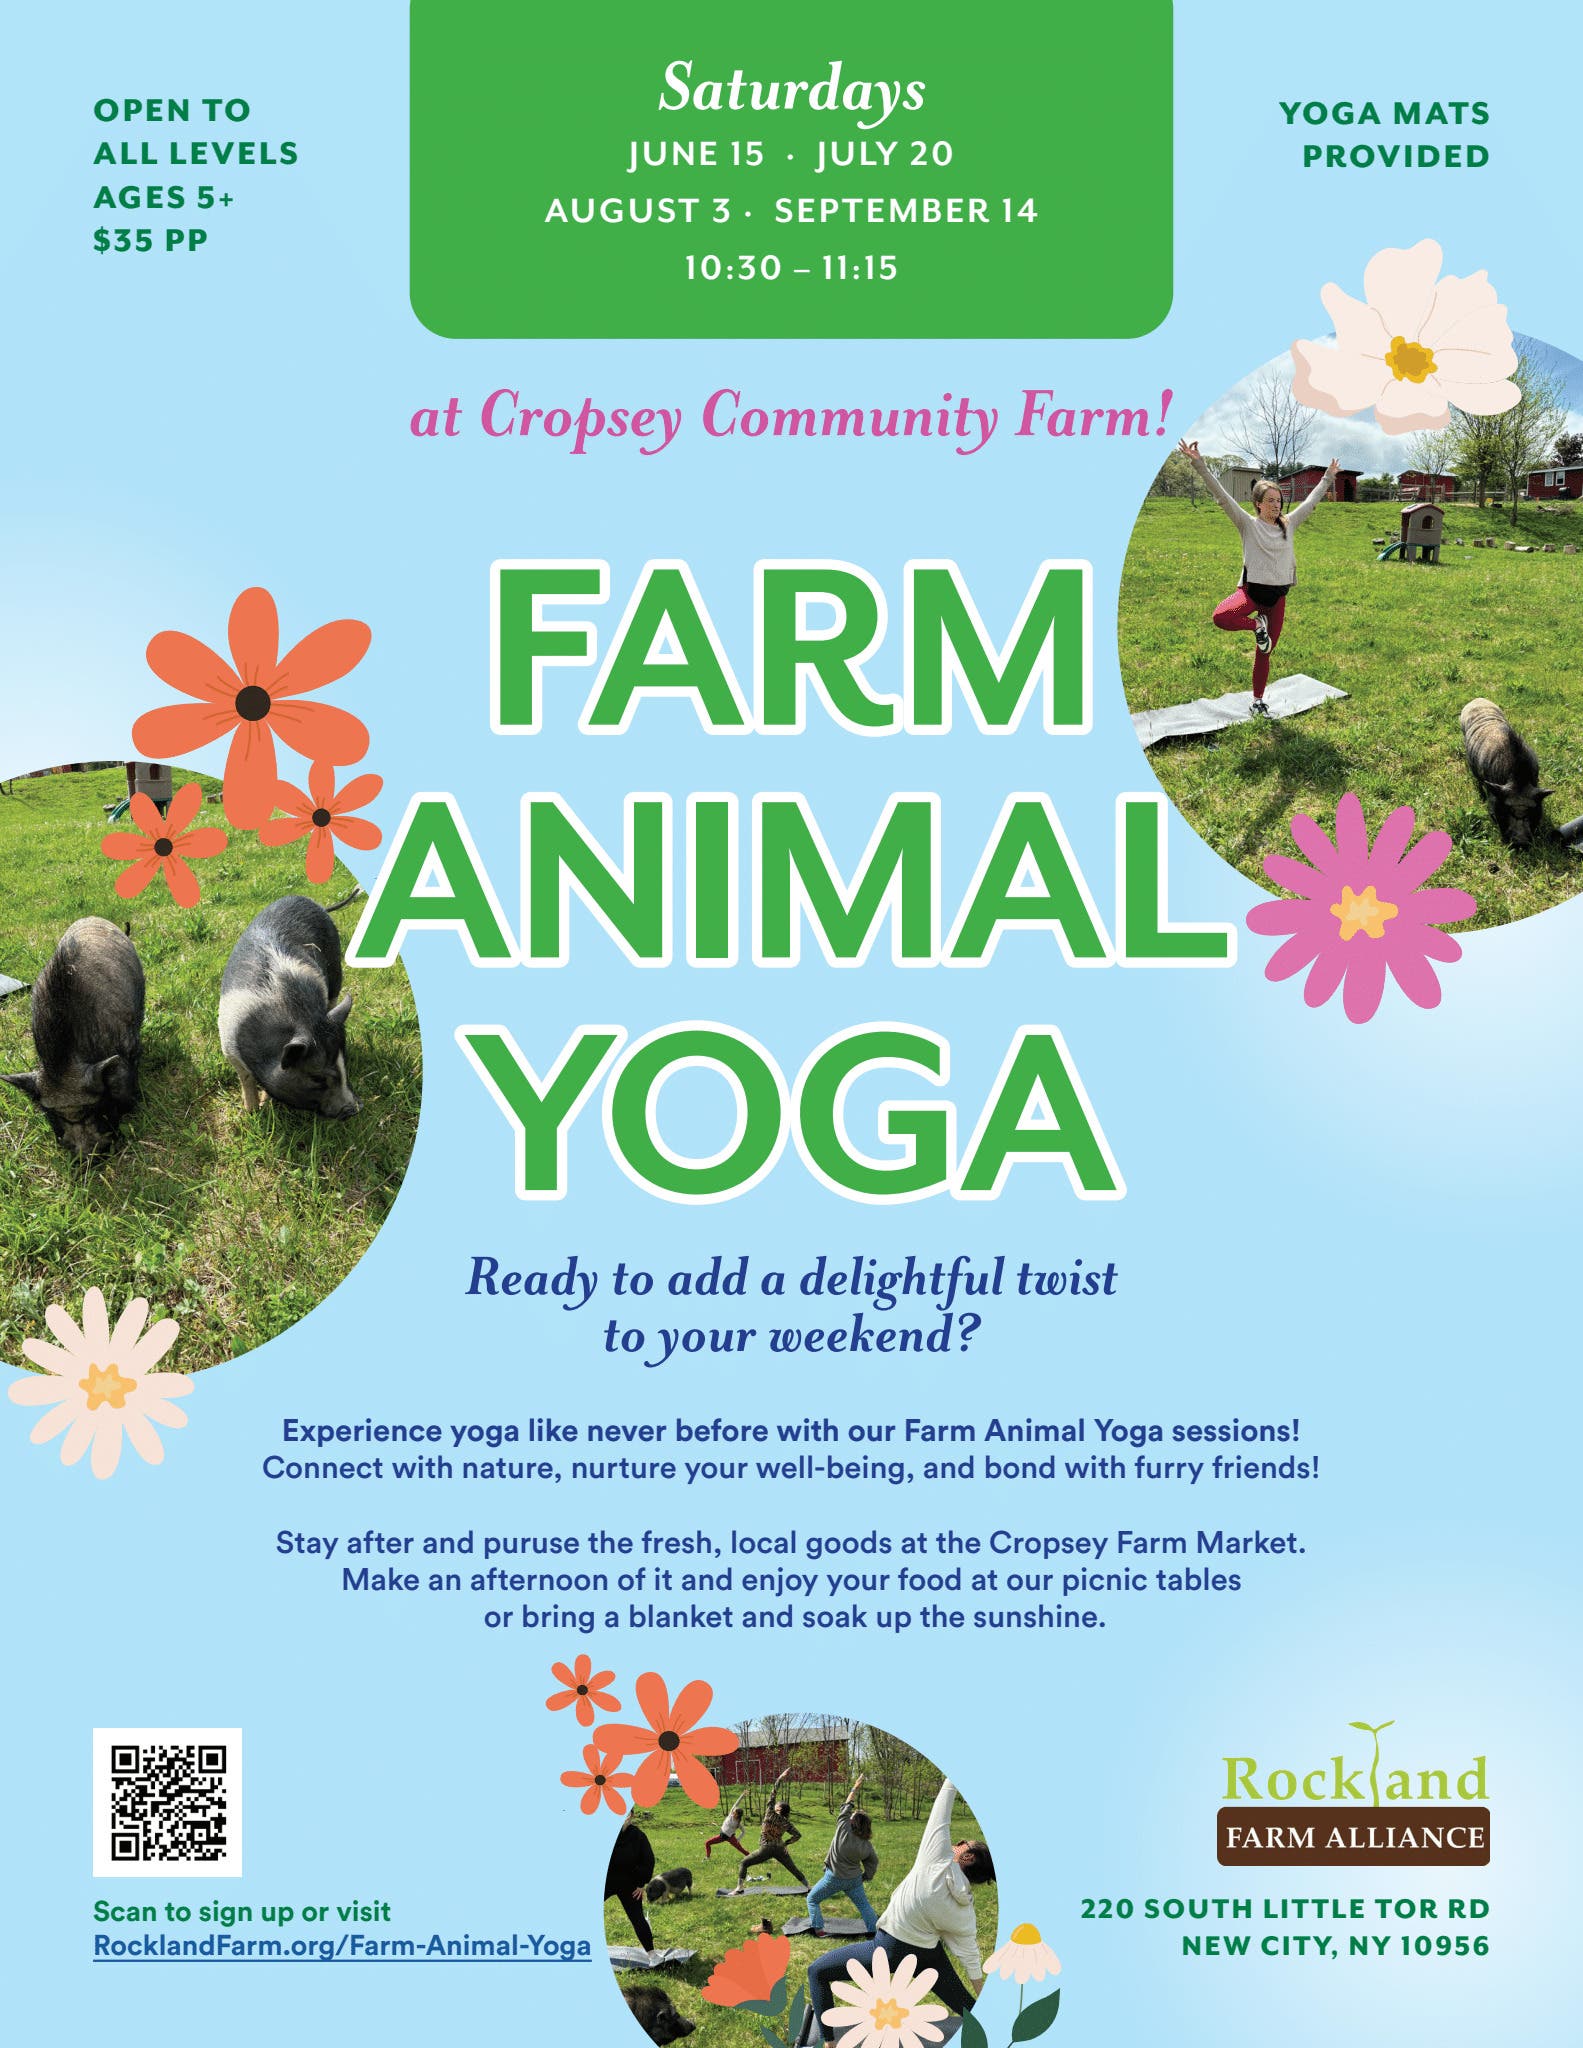 Farm Animal Yoga & Christmas in July Photo Sessions at Cropsey Community Farm